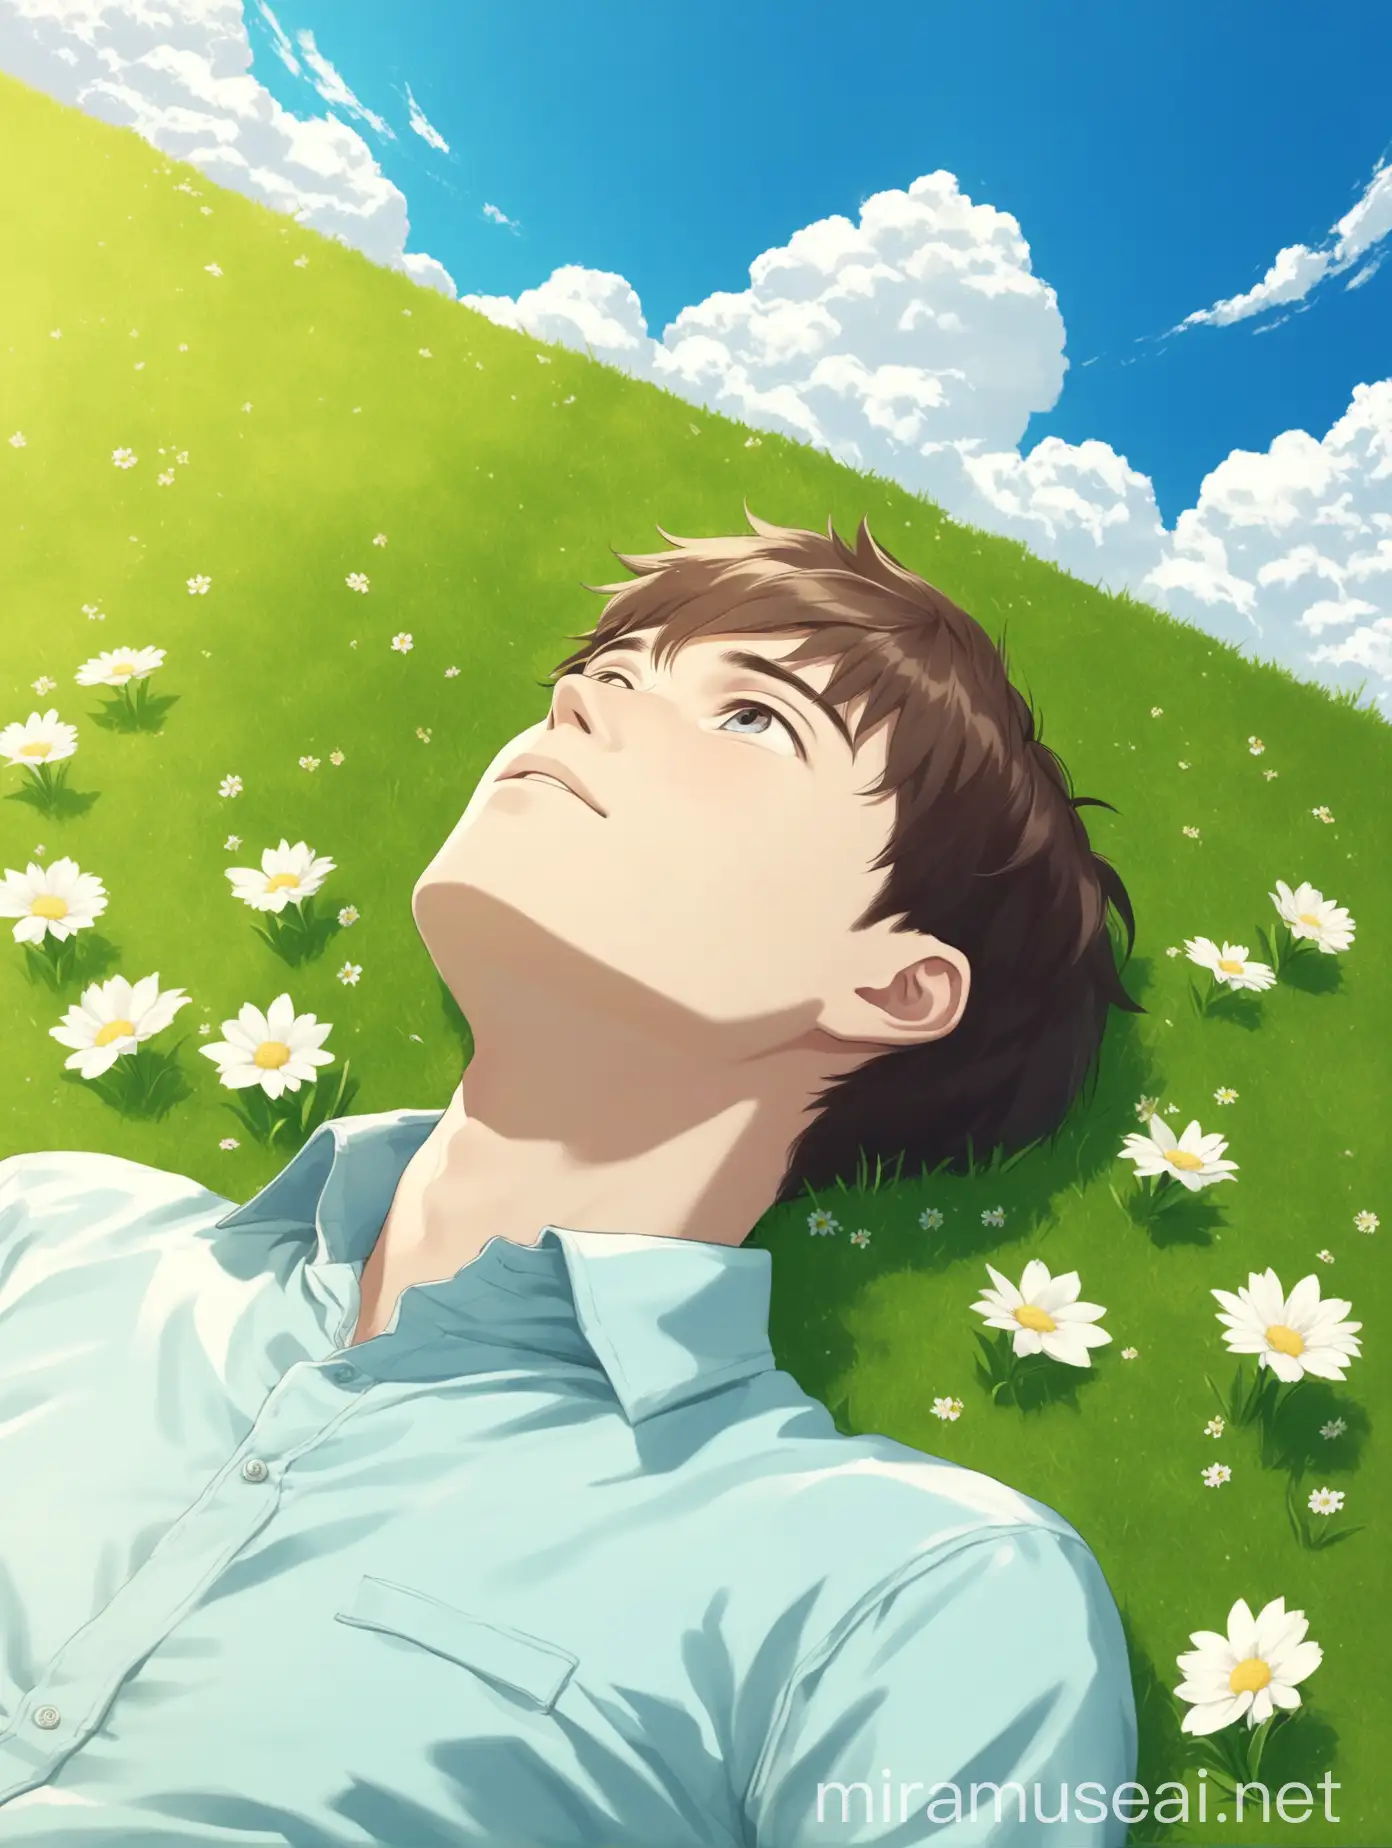 a young man is lying around on the grass in the spring, looking up at the blue sky and white clouds